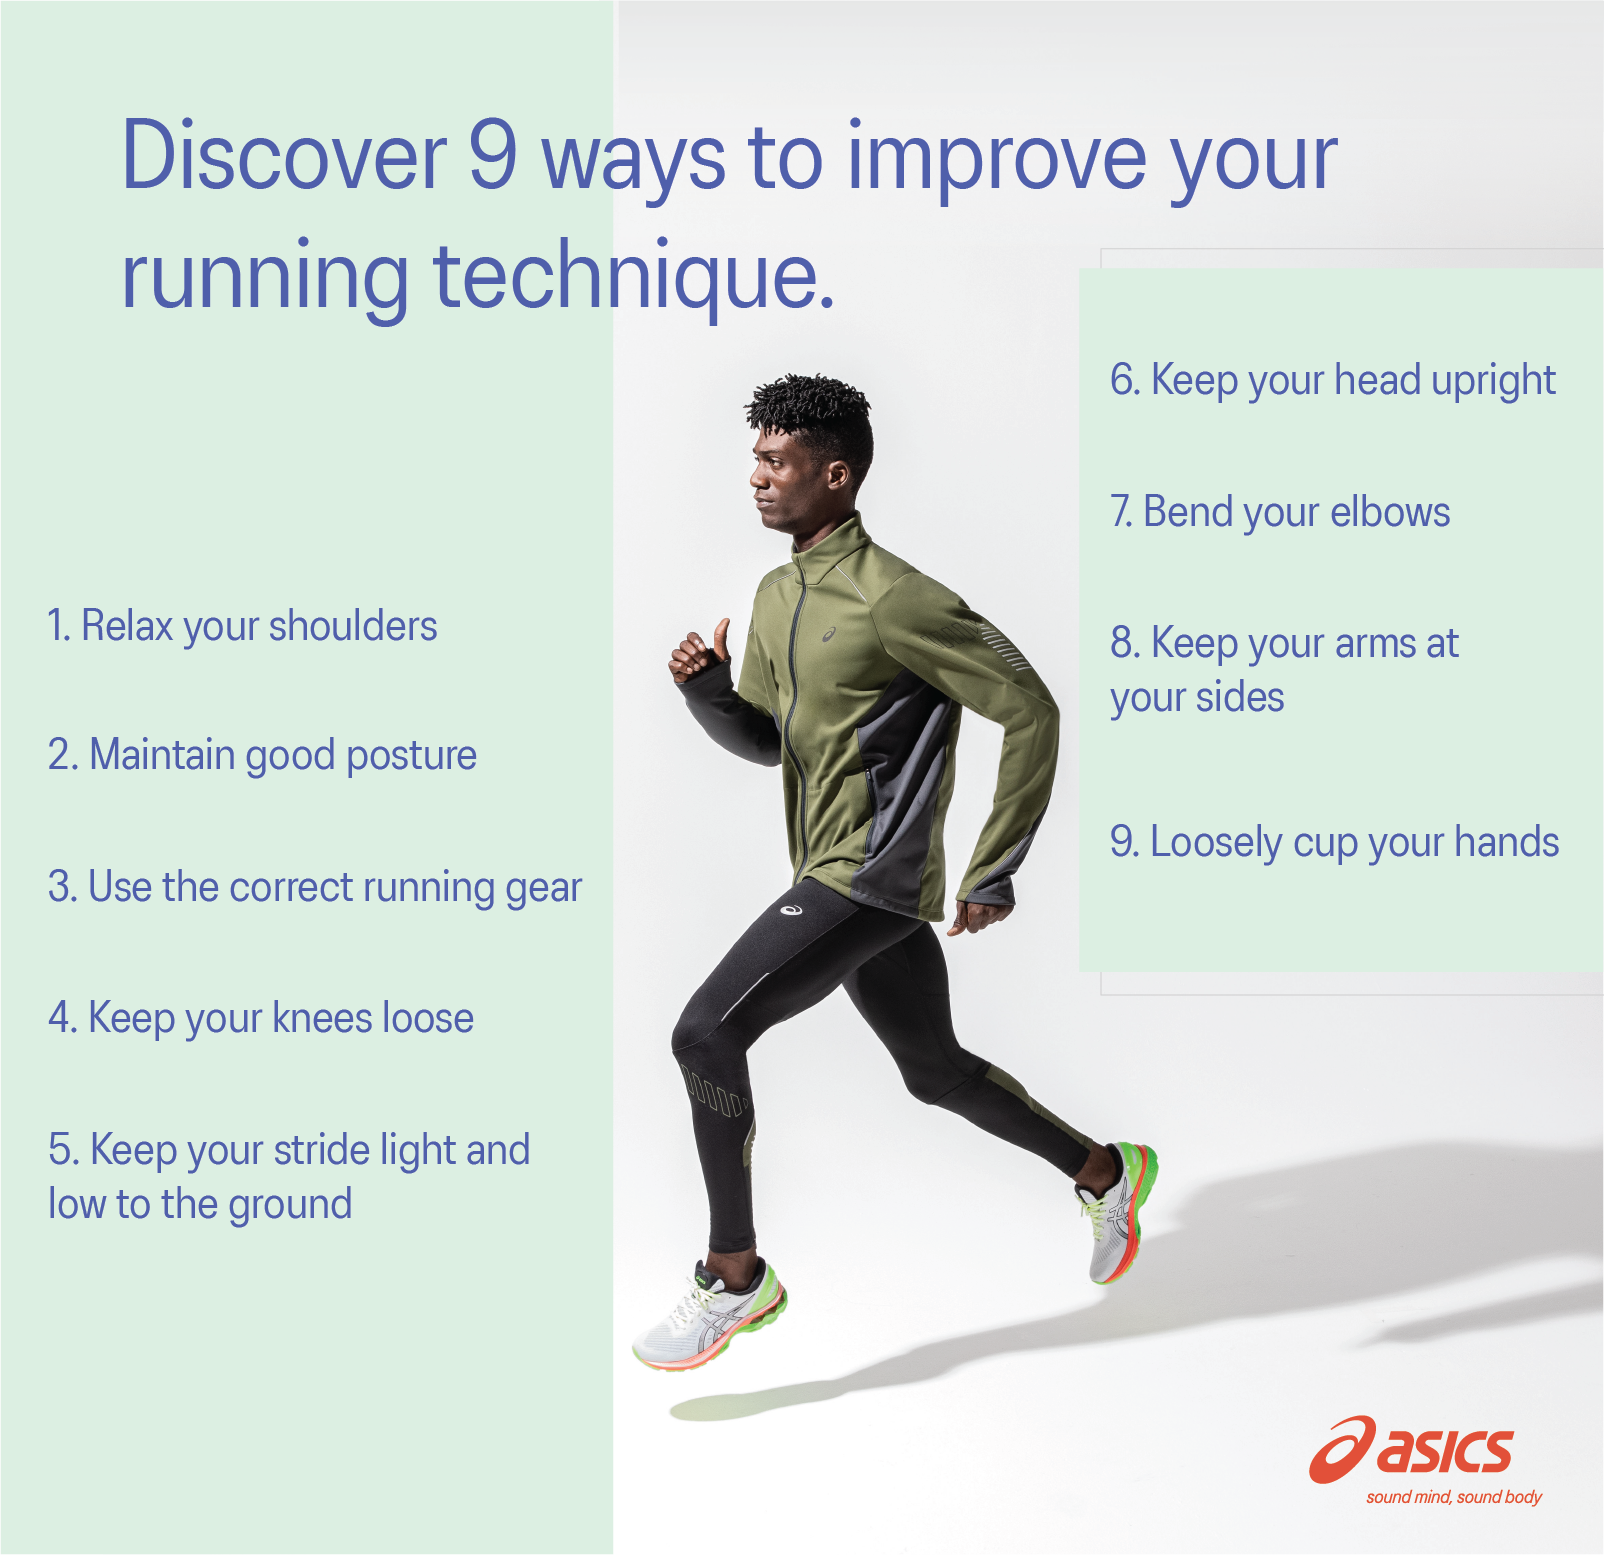 10 ways to improve your running technique